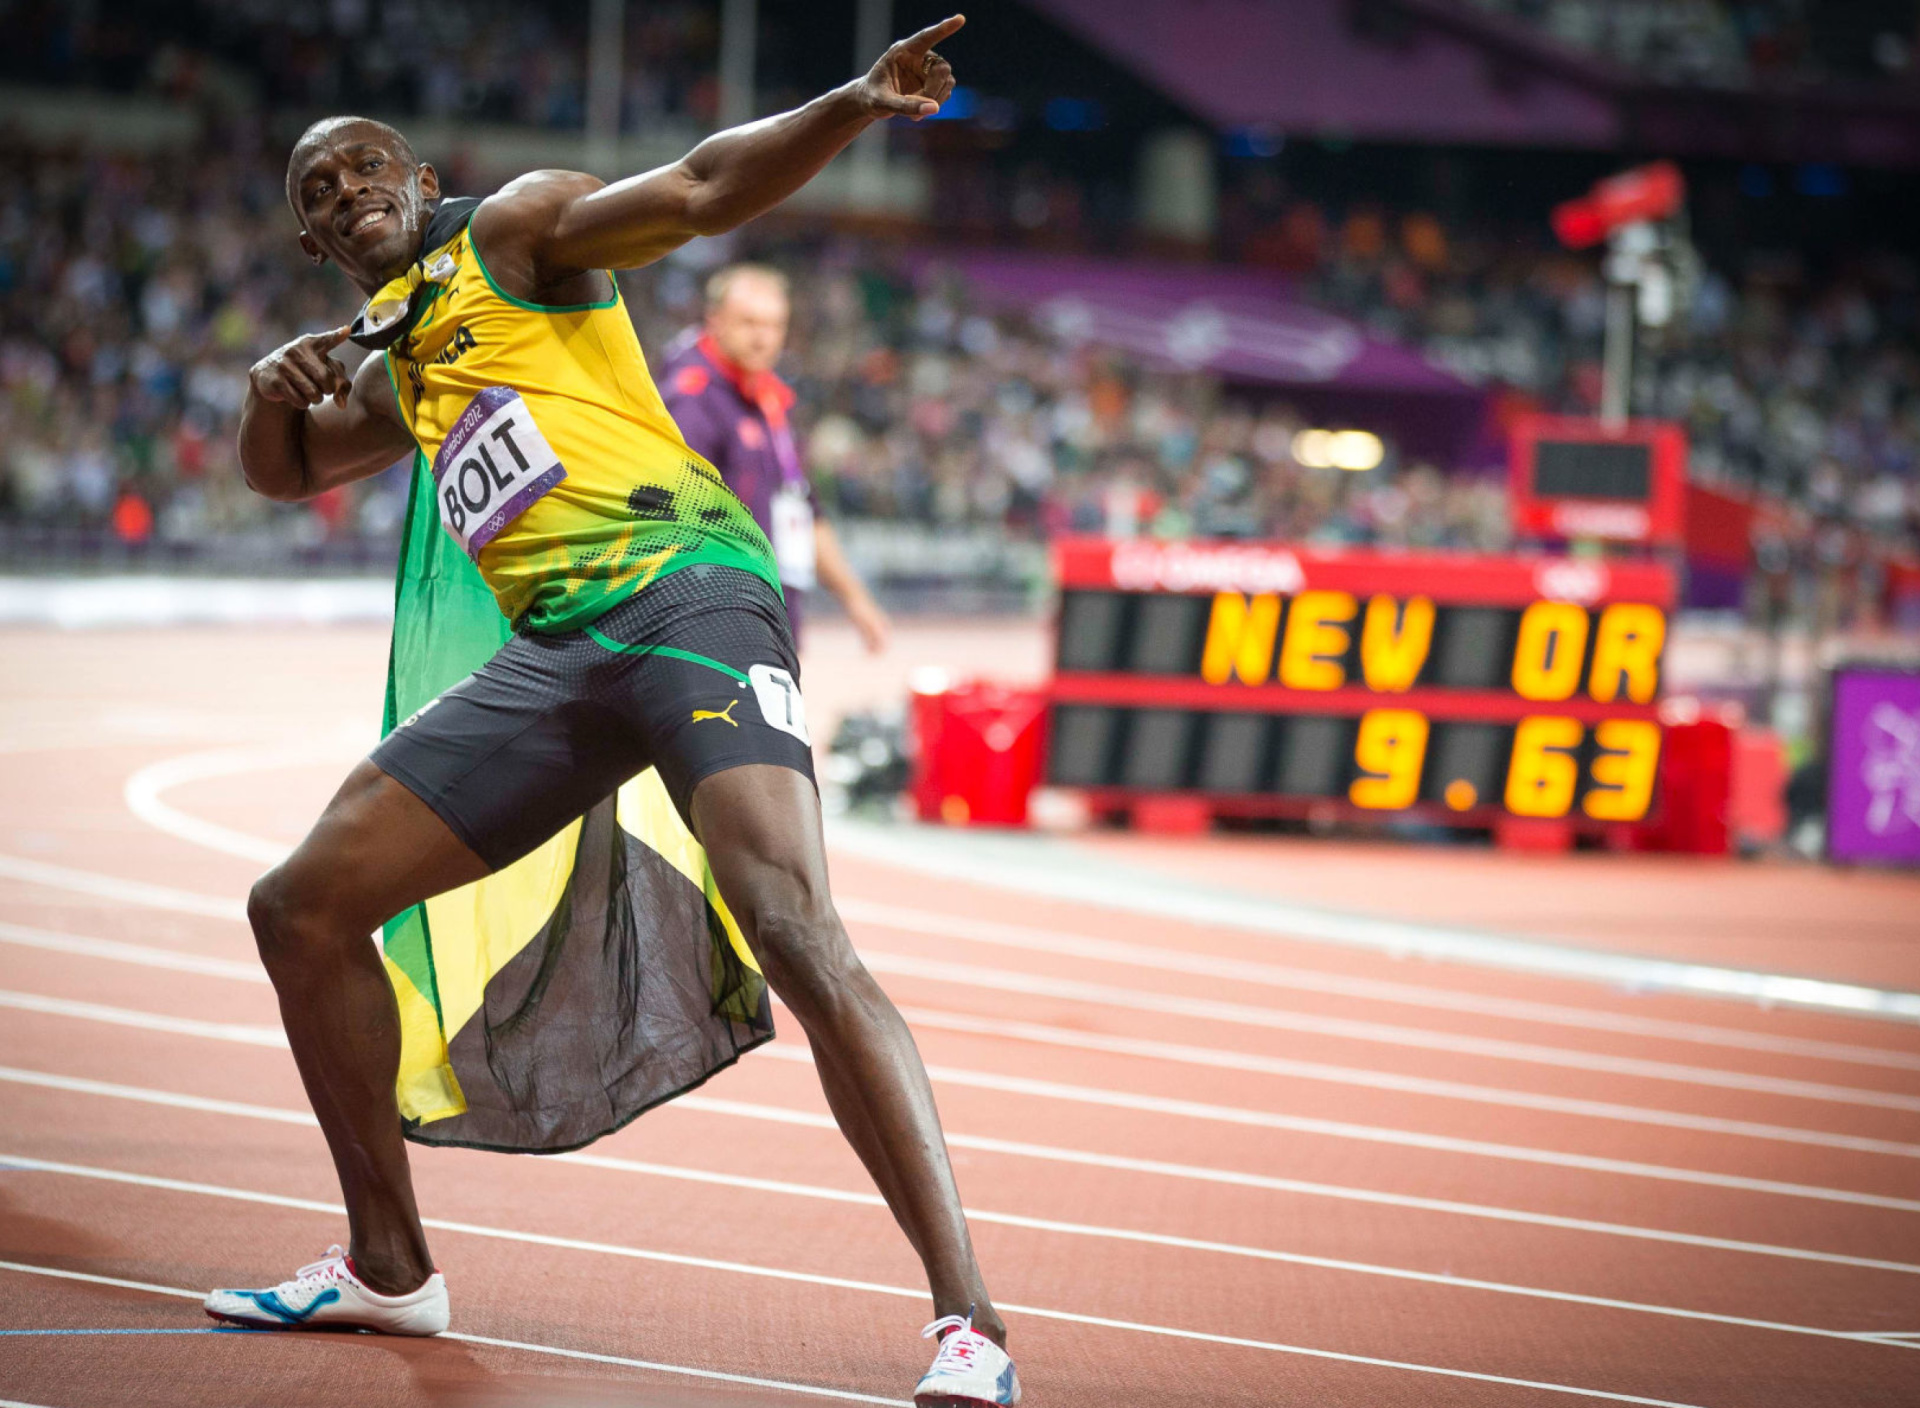 Usain Bolt won medals in the Olympics wallpaper 1920x1408